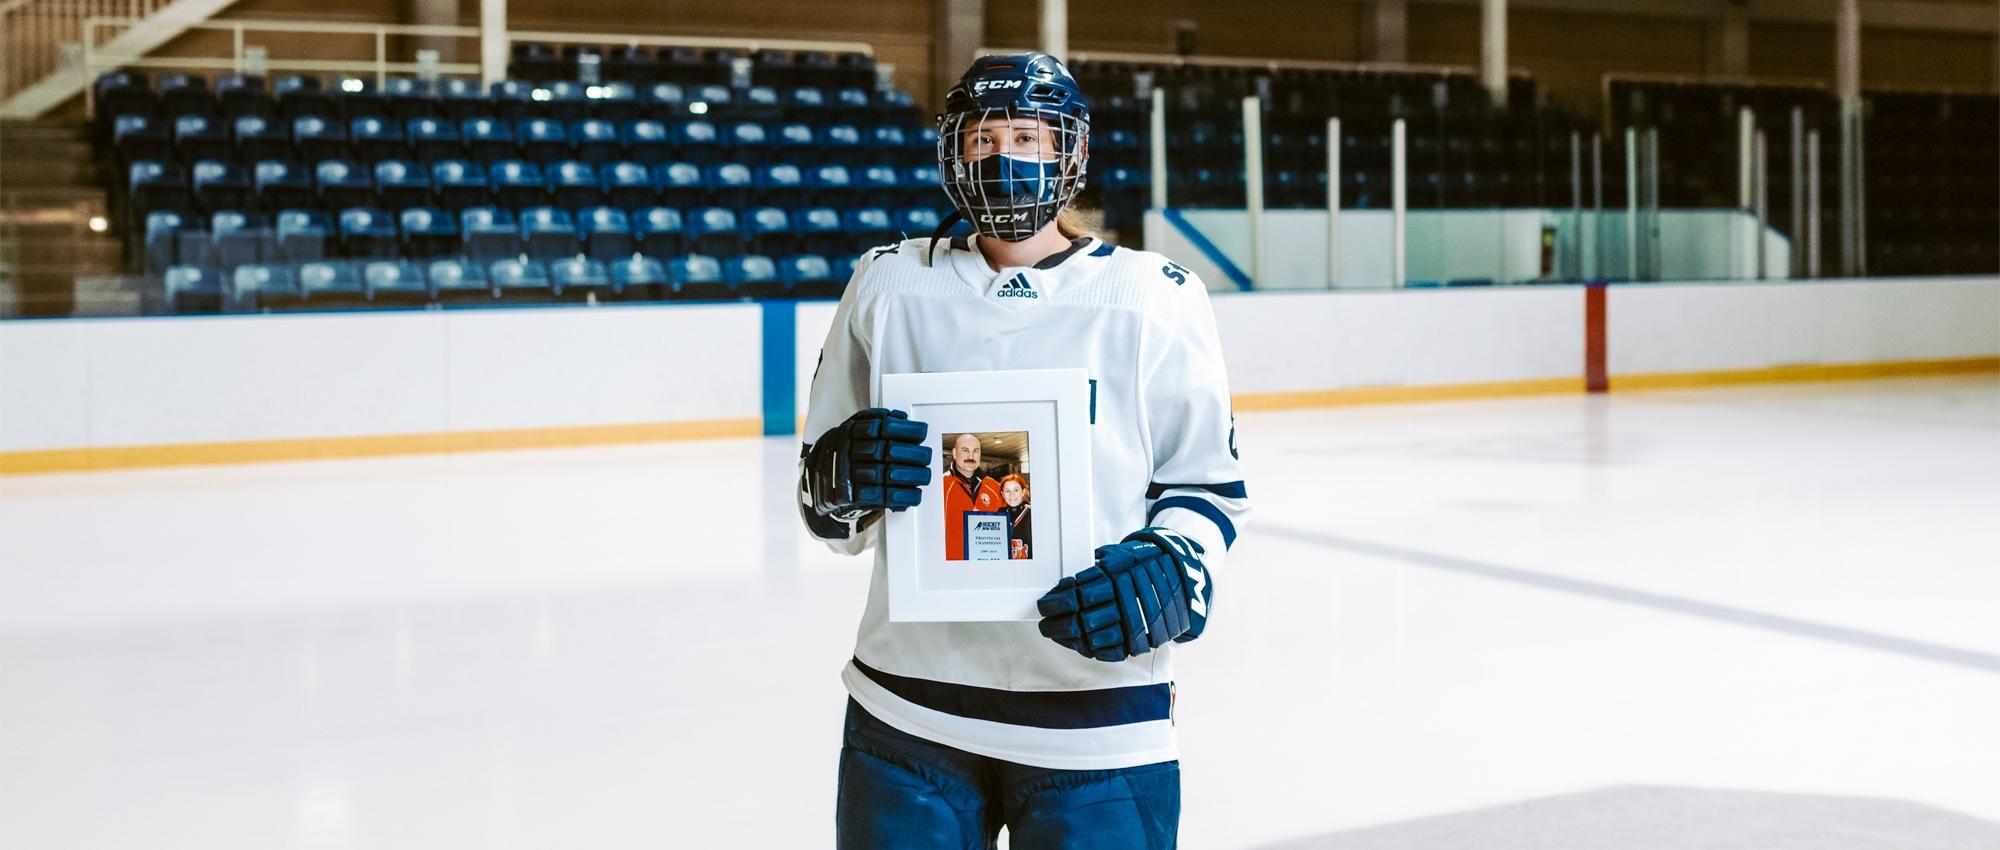 Featured image of Julia Schmitt holding up a picture frame of her and her dad wearing hockey equipment in an indoor hockey rink.